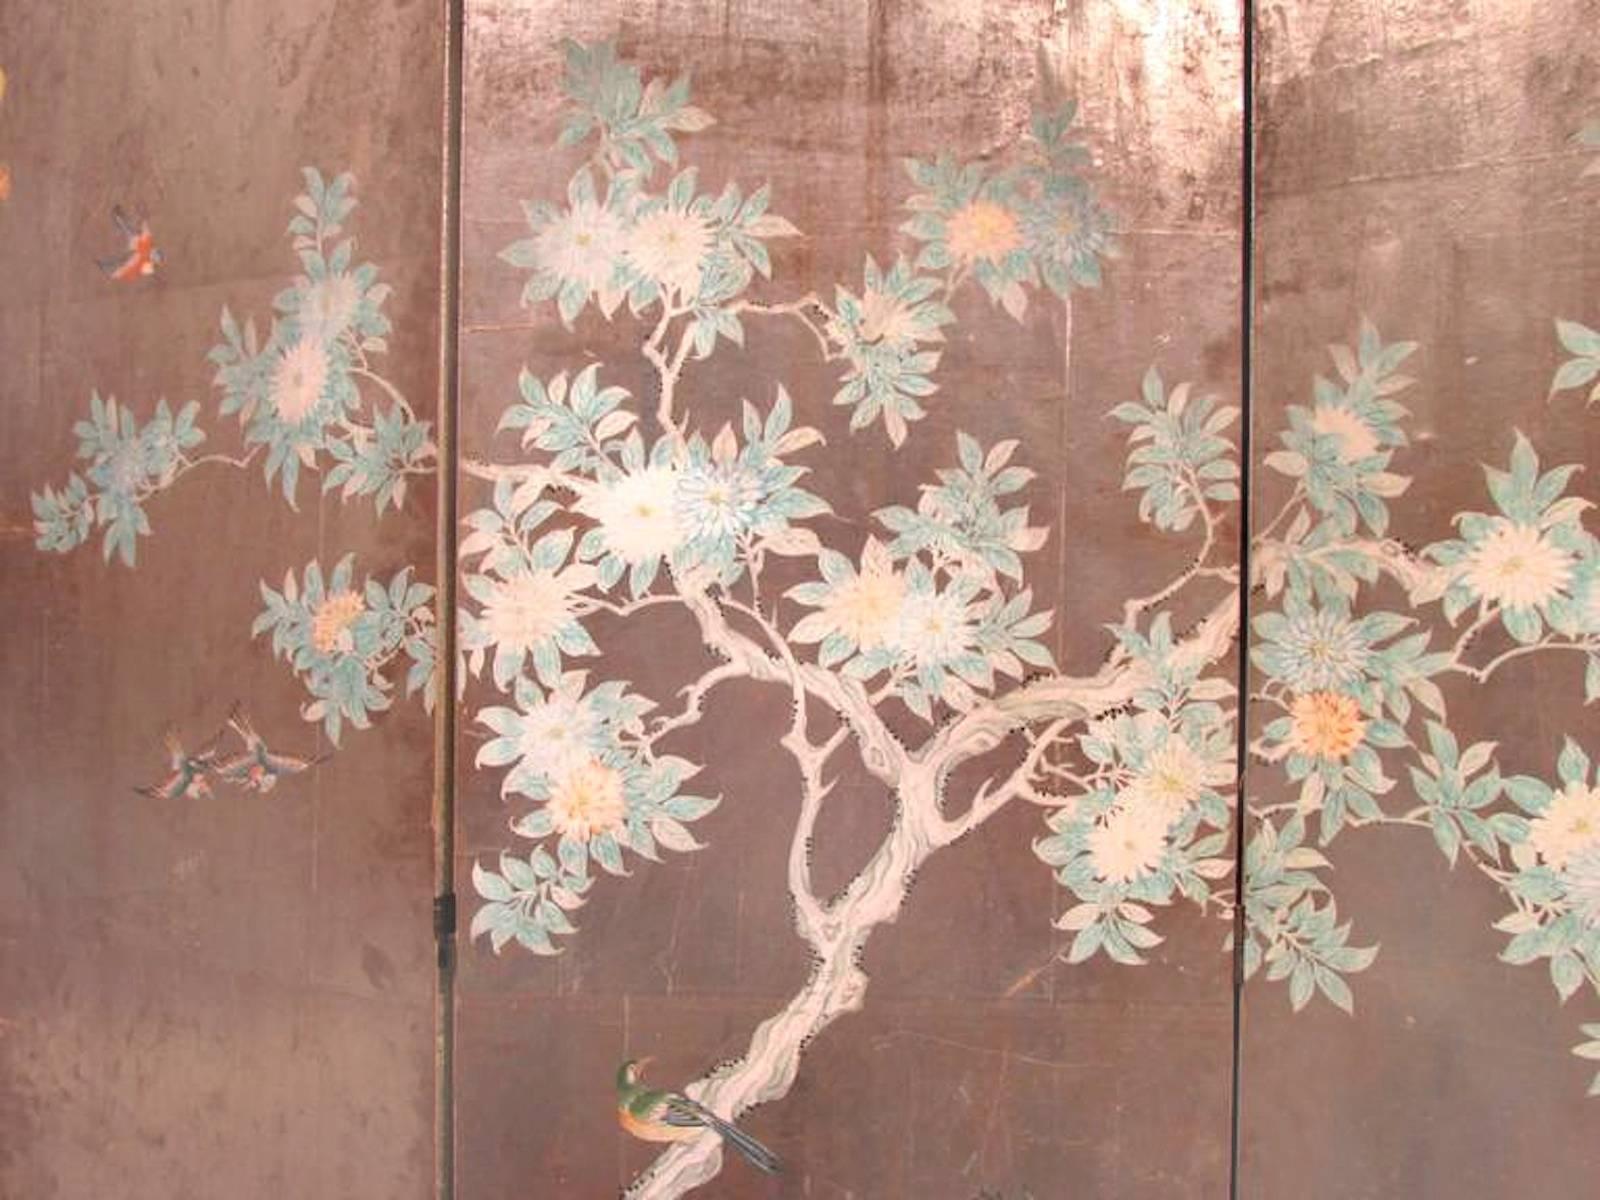 Early 20th century hand-painted Chinese wallpaper screen. Four-panel silver leaf background with hand-painted scene. Screen is backed in a silver fretwork pattern.
Dimensions: 72